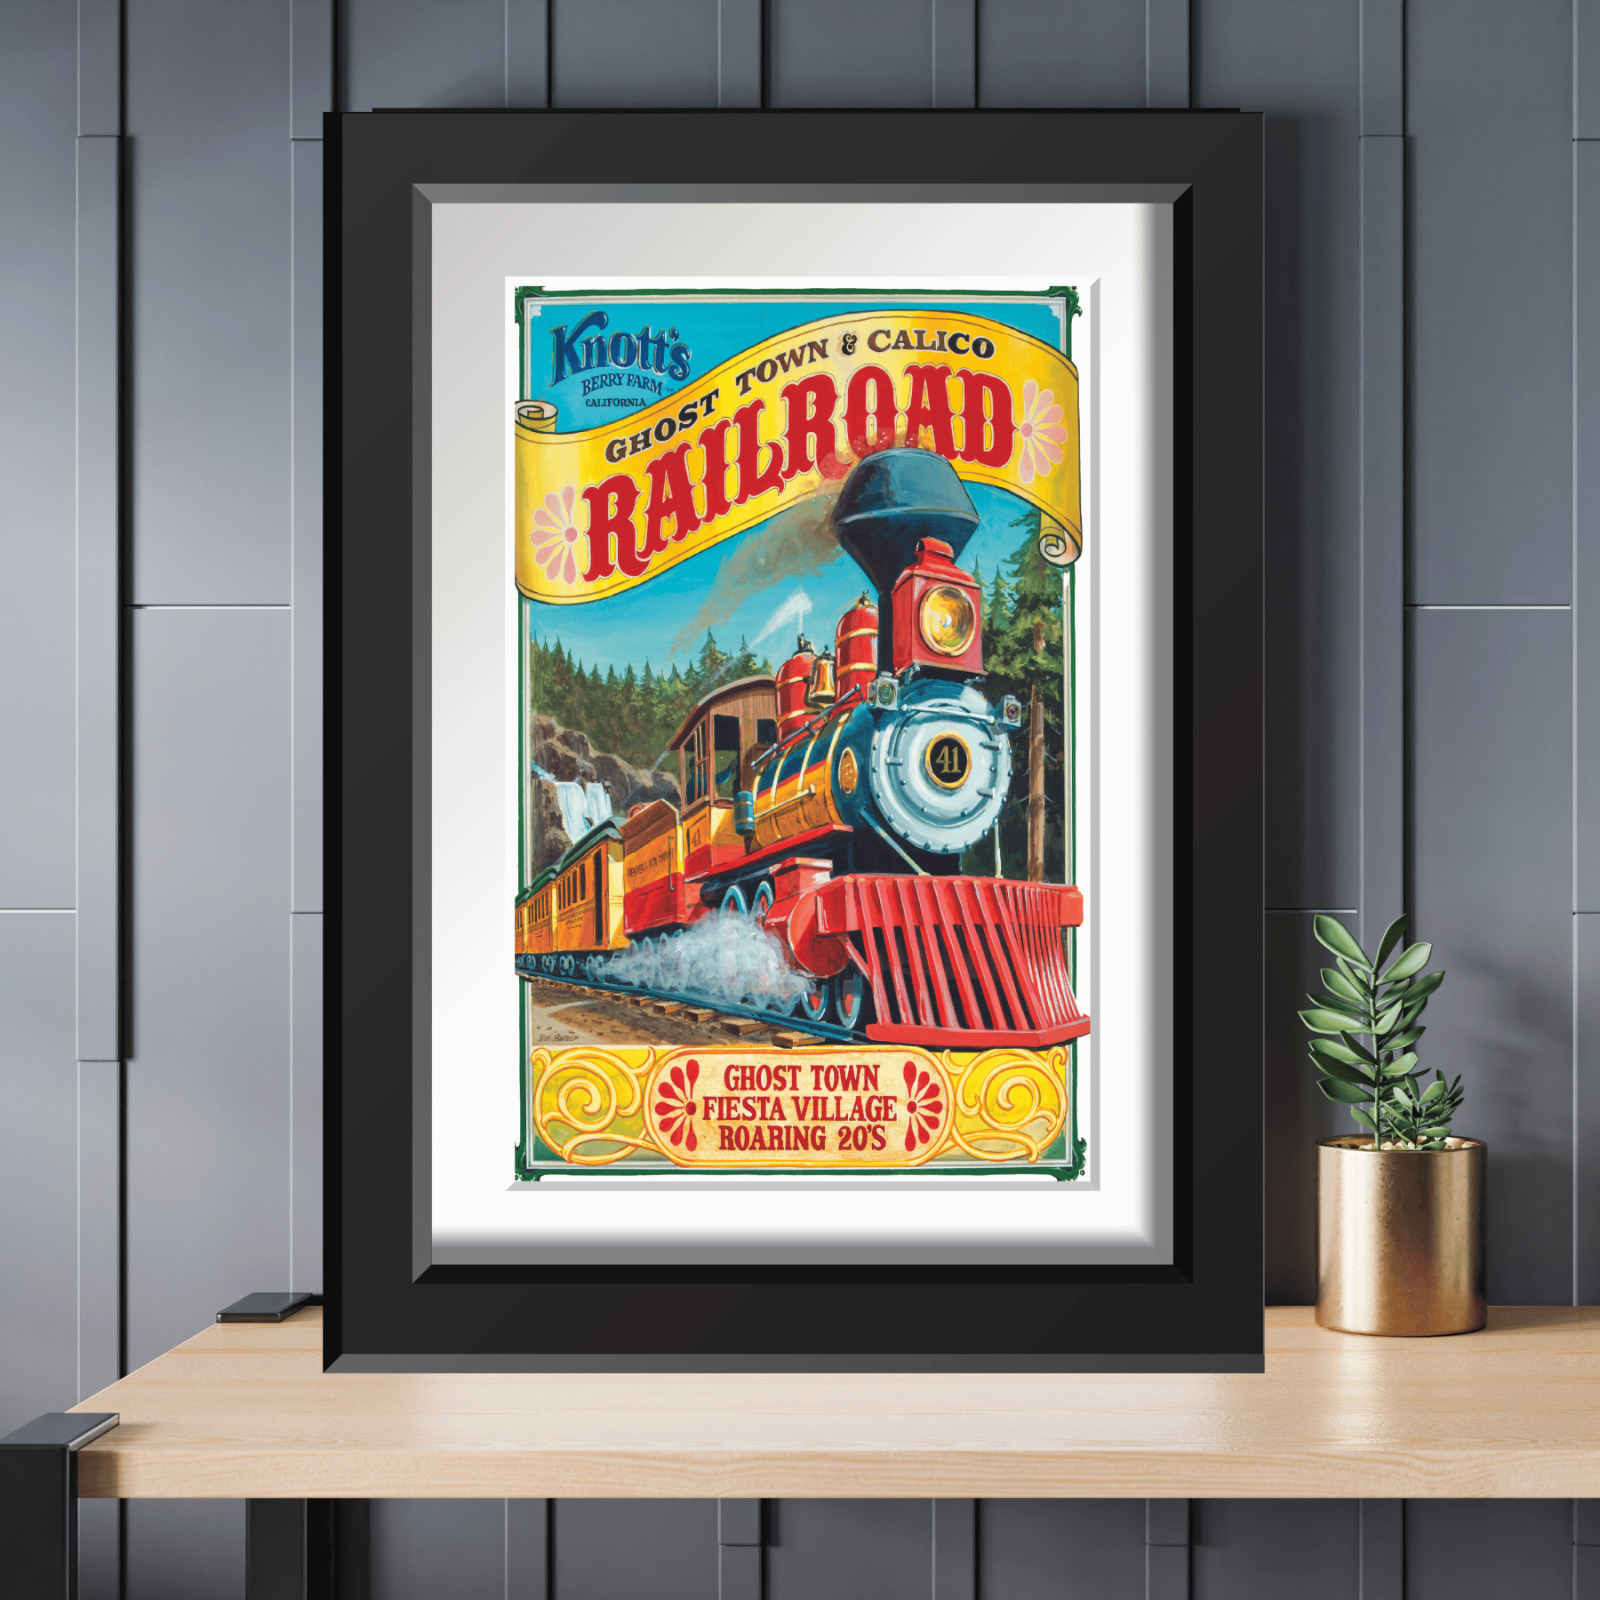 Knotts Berry Farm Ghost Town Calico Railroad Ride Vintage Restored Poster Print